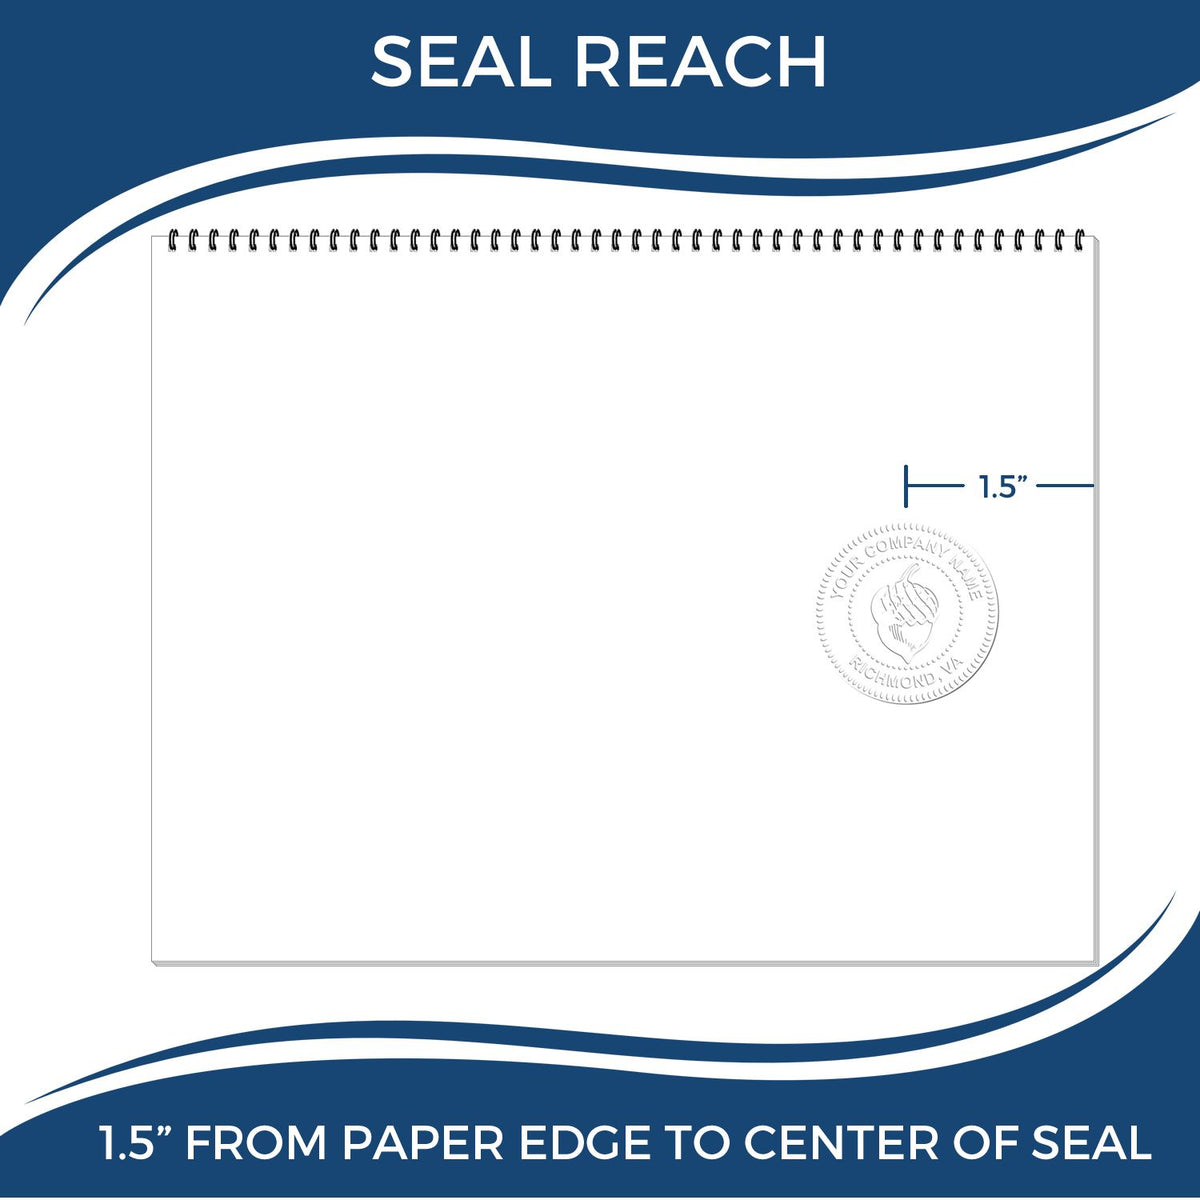 An infographic showing the seal reach which is represented by a ruler and a miniature seal image of the Hybrid New York Architect Seal